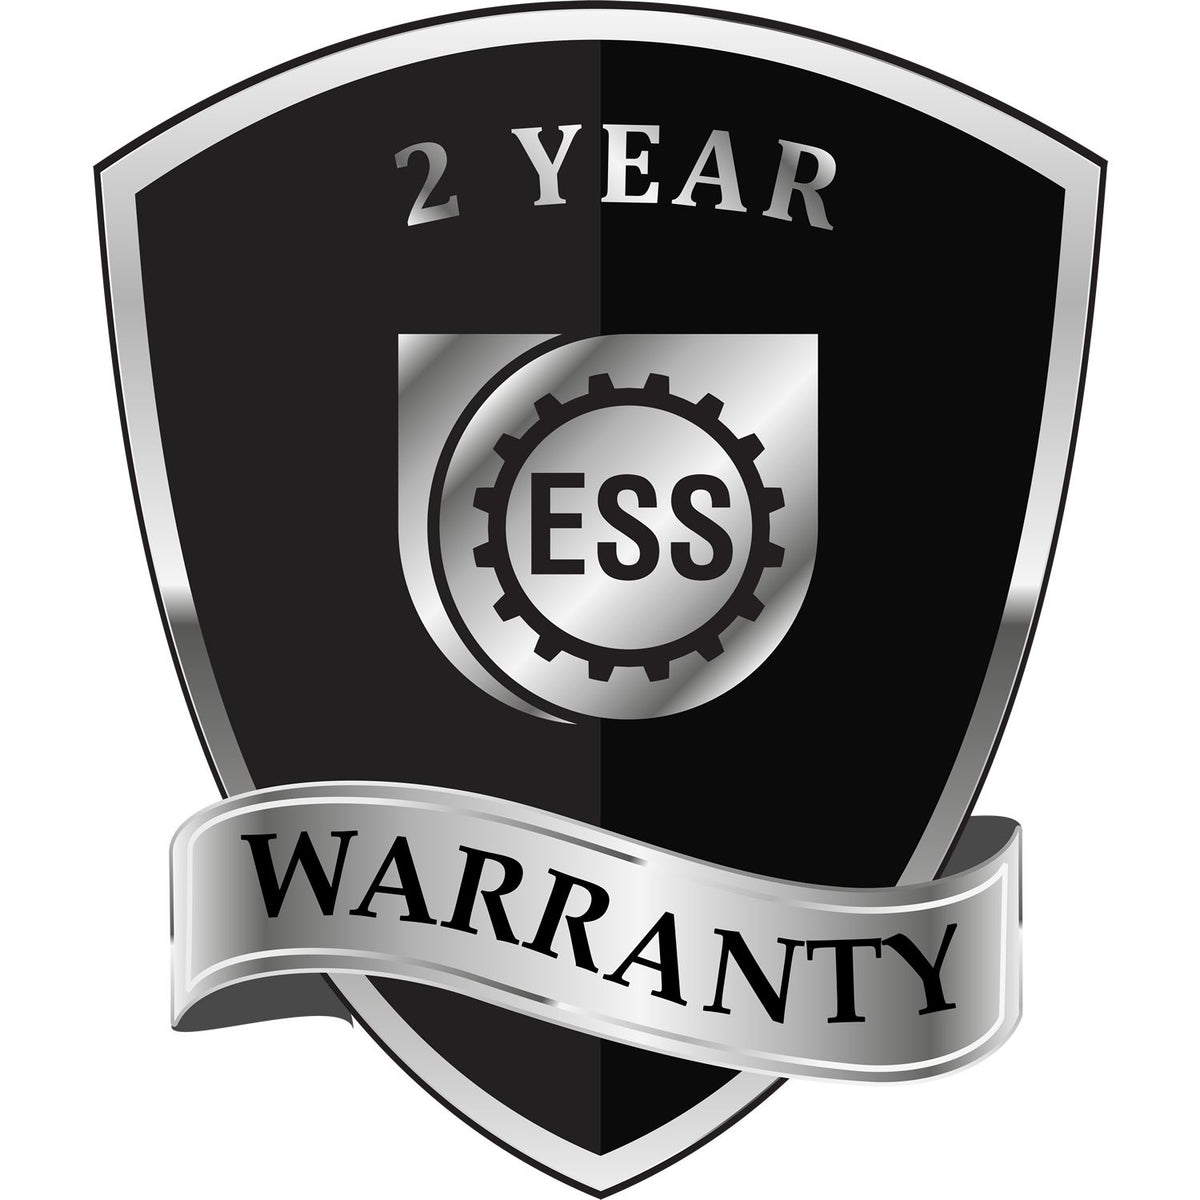 A badge or emblem showing a warranty icon for the State of Wyoming Extended Long Reach Engineer Seal